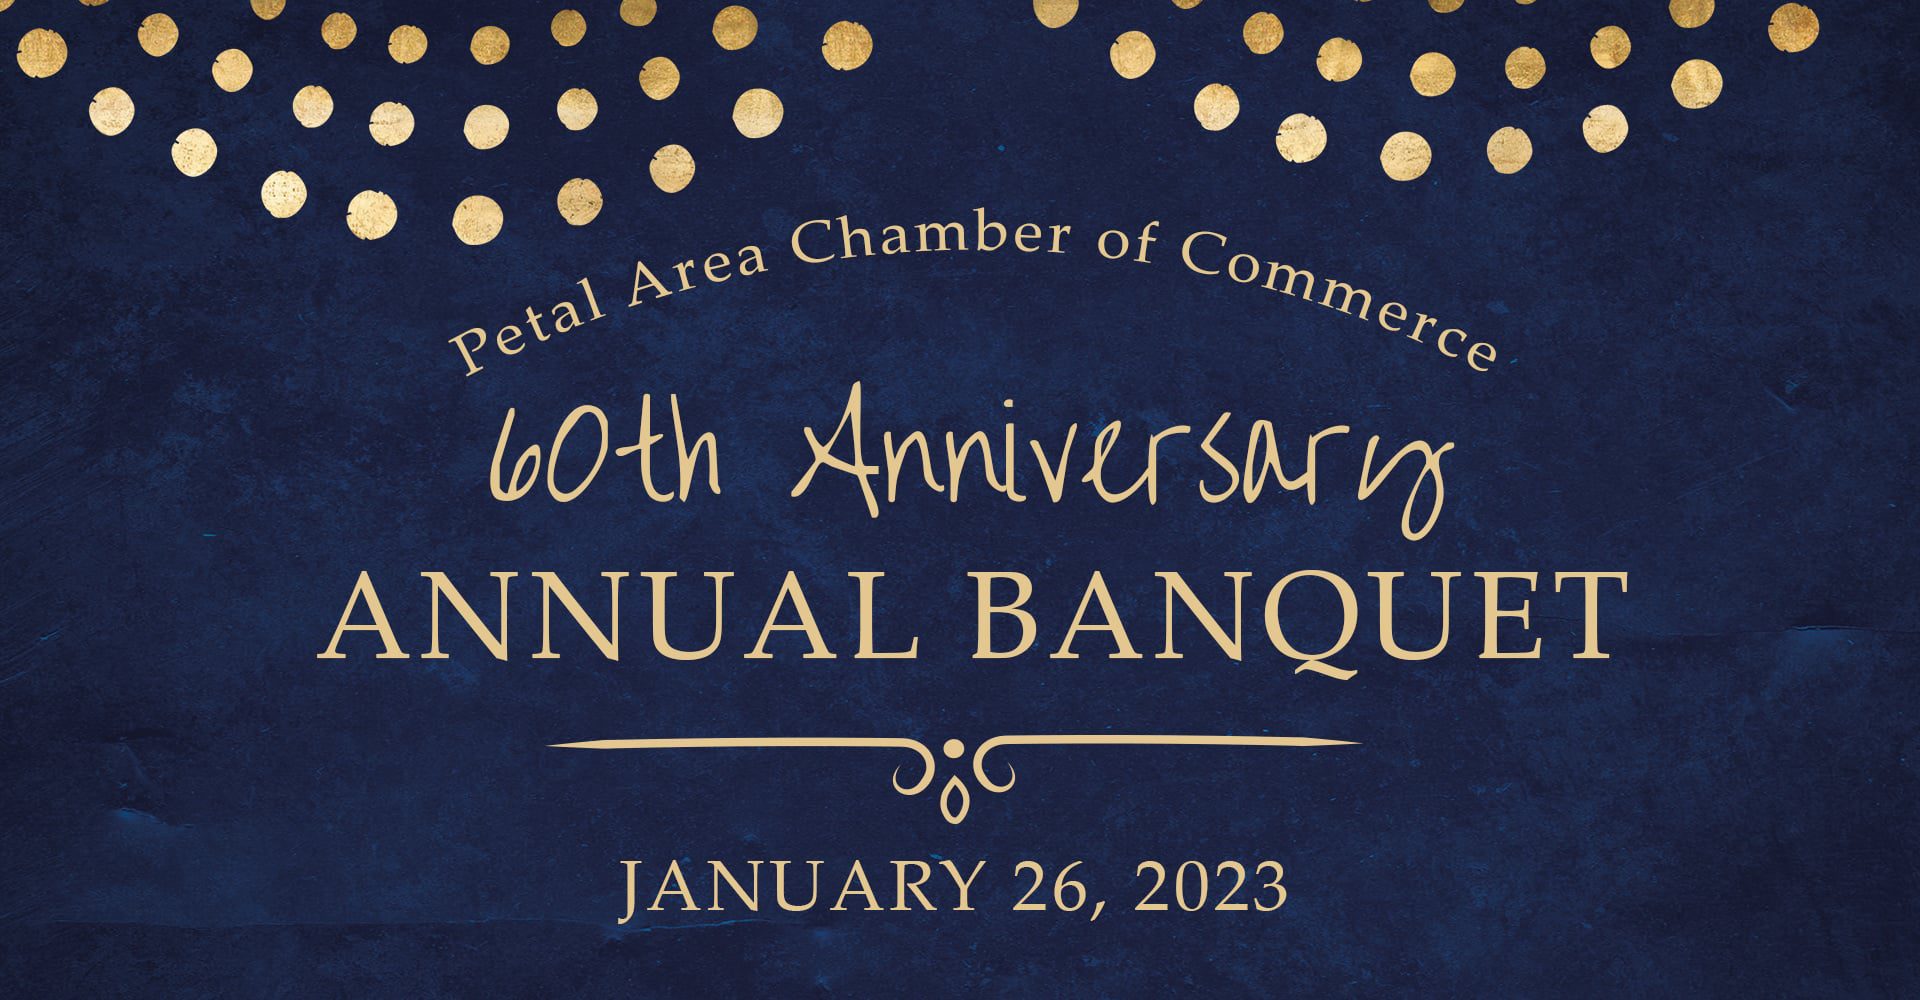 Petal Area Chamber of Commerce Annual Banquet